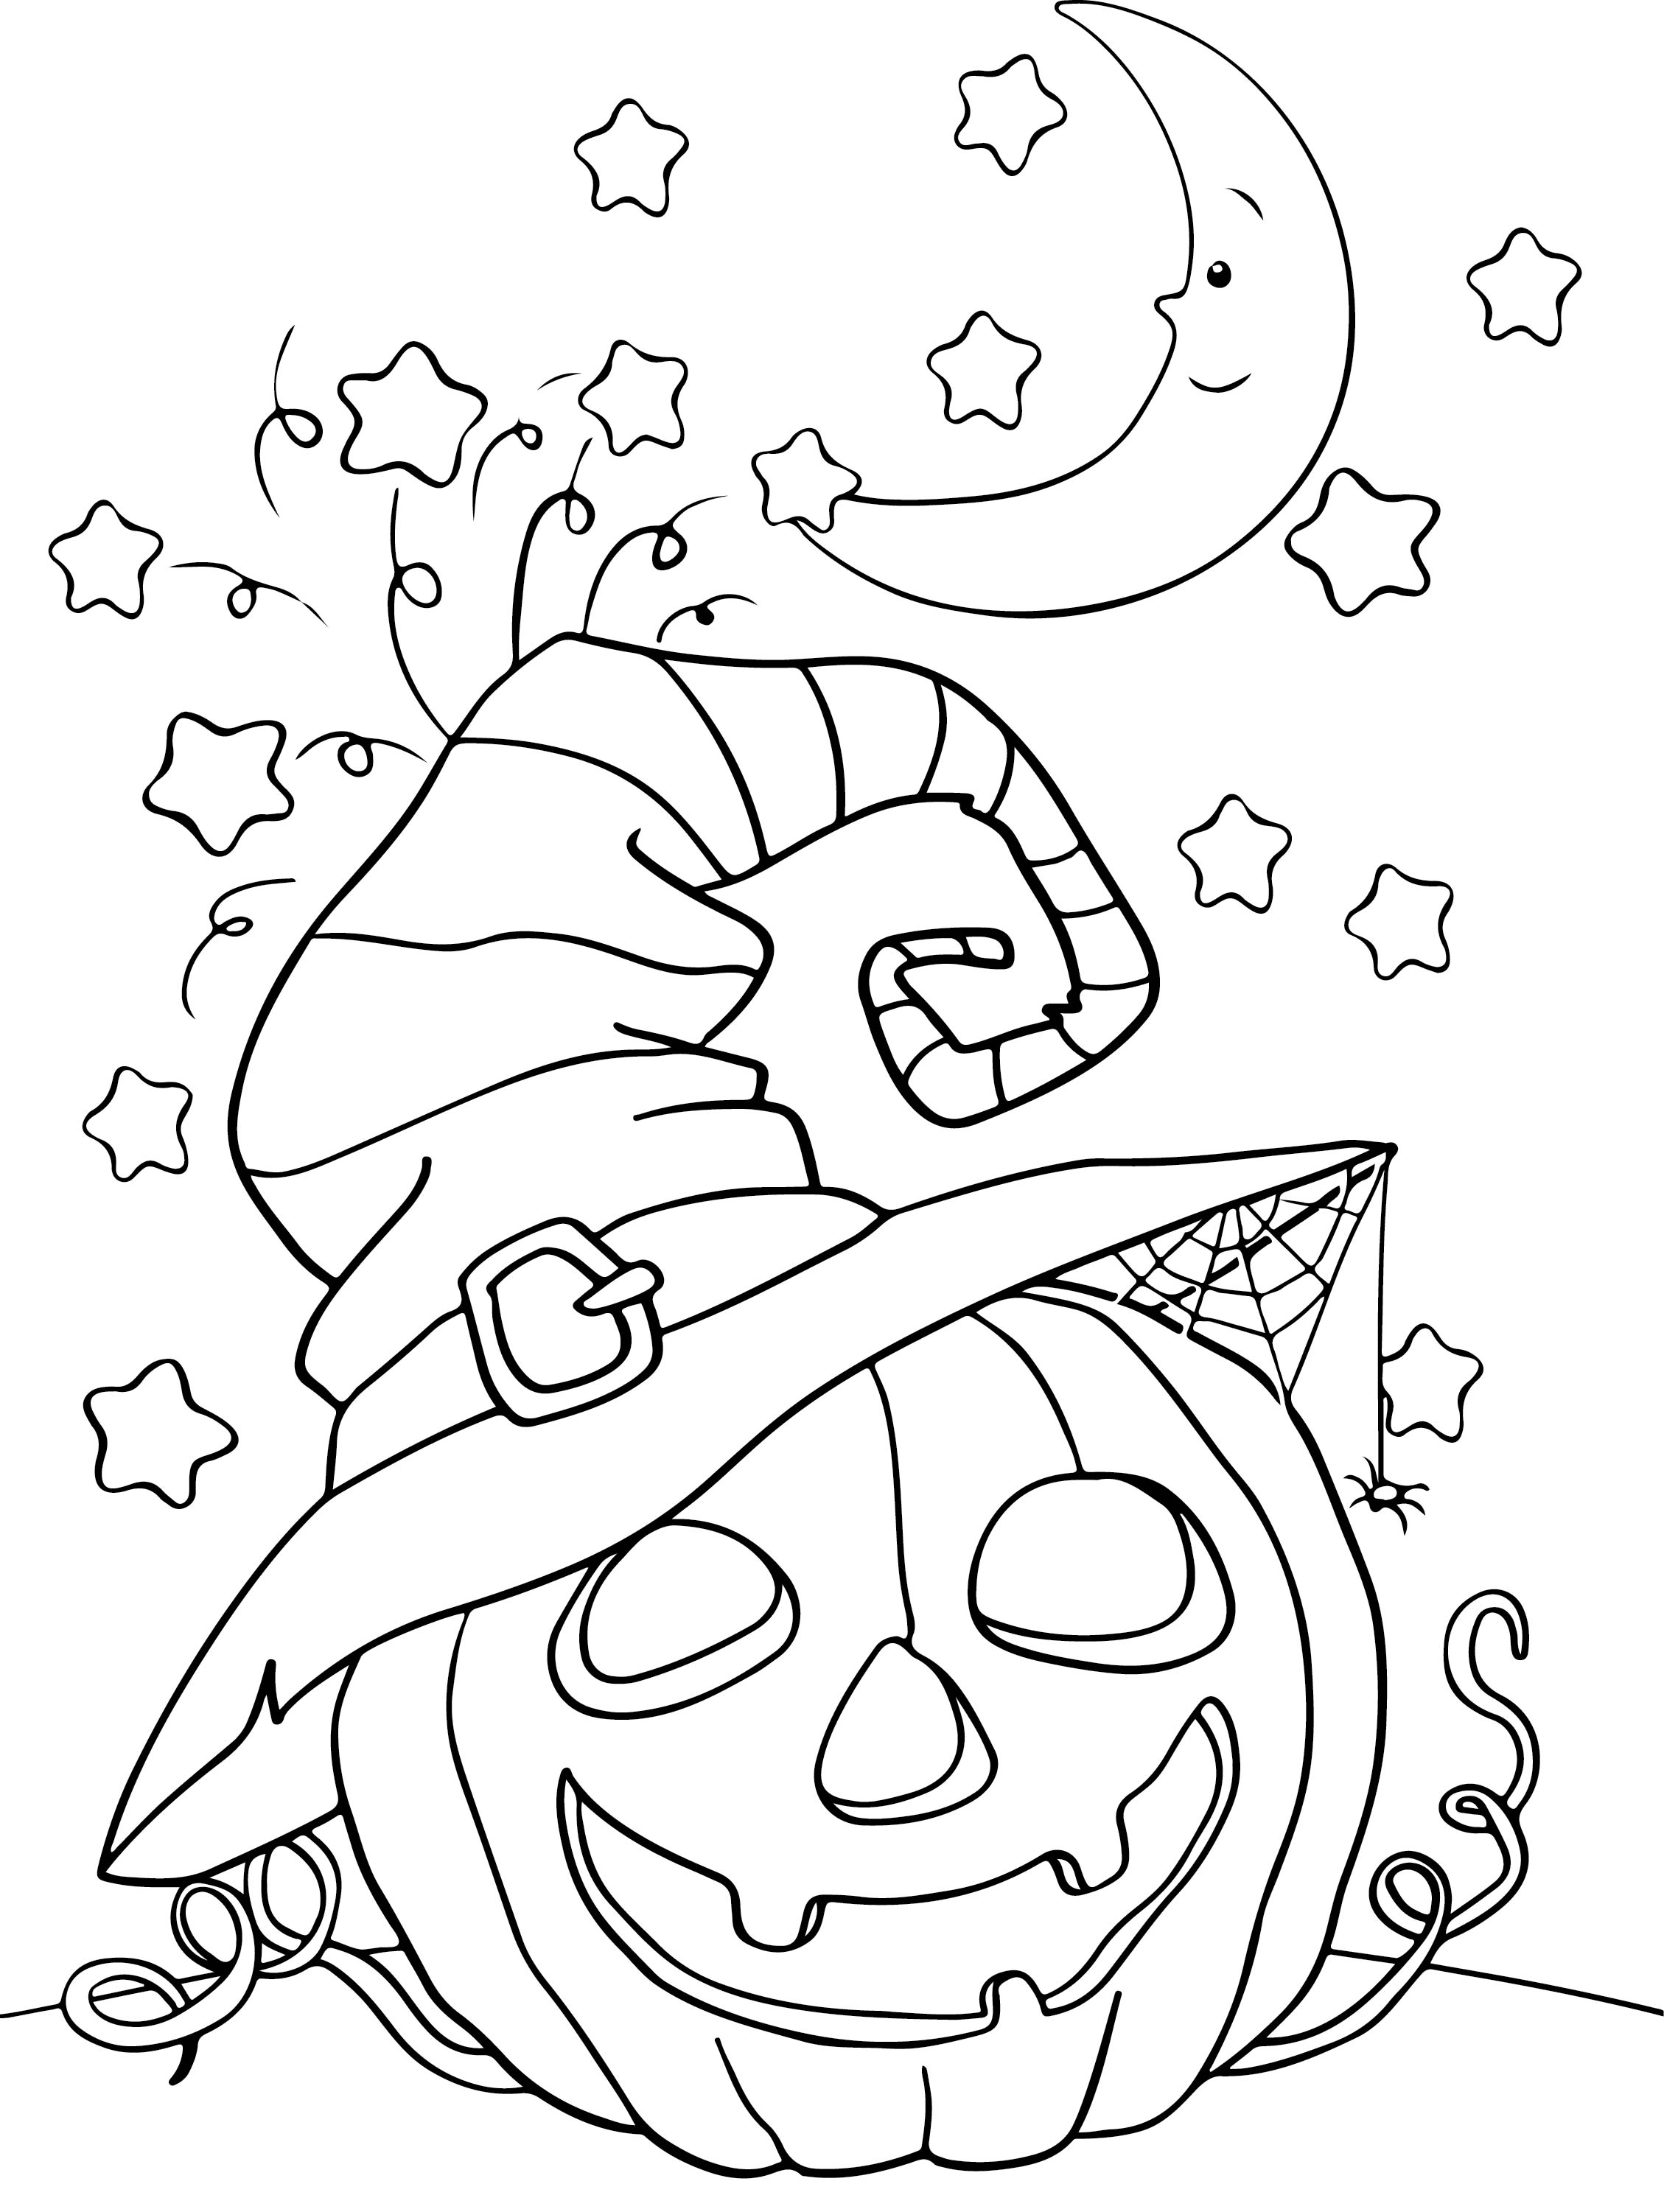 halloween-coloring-pages-for-teachers-free-download-gambr-co